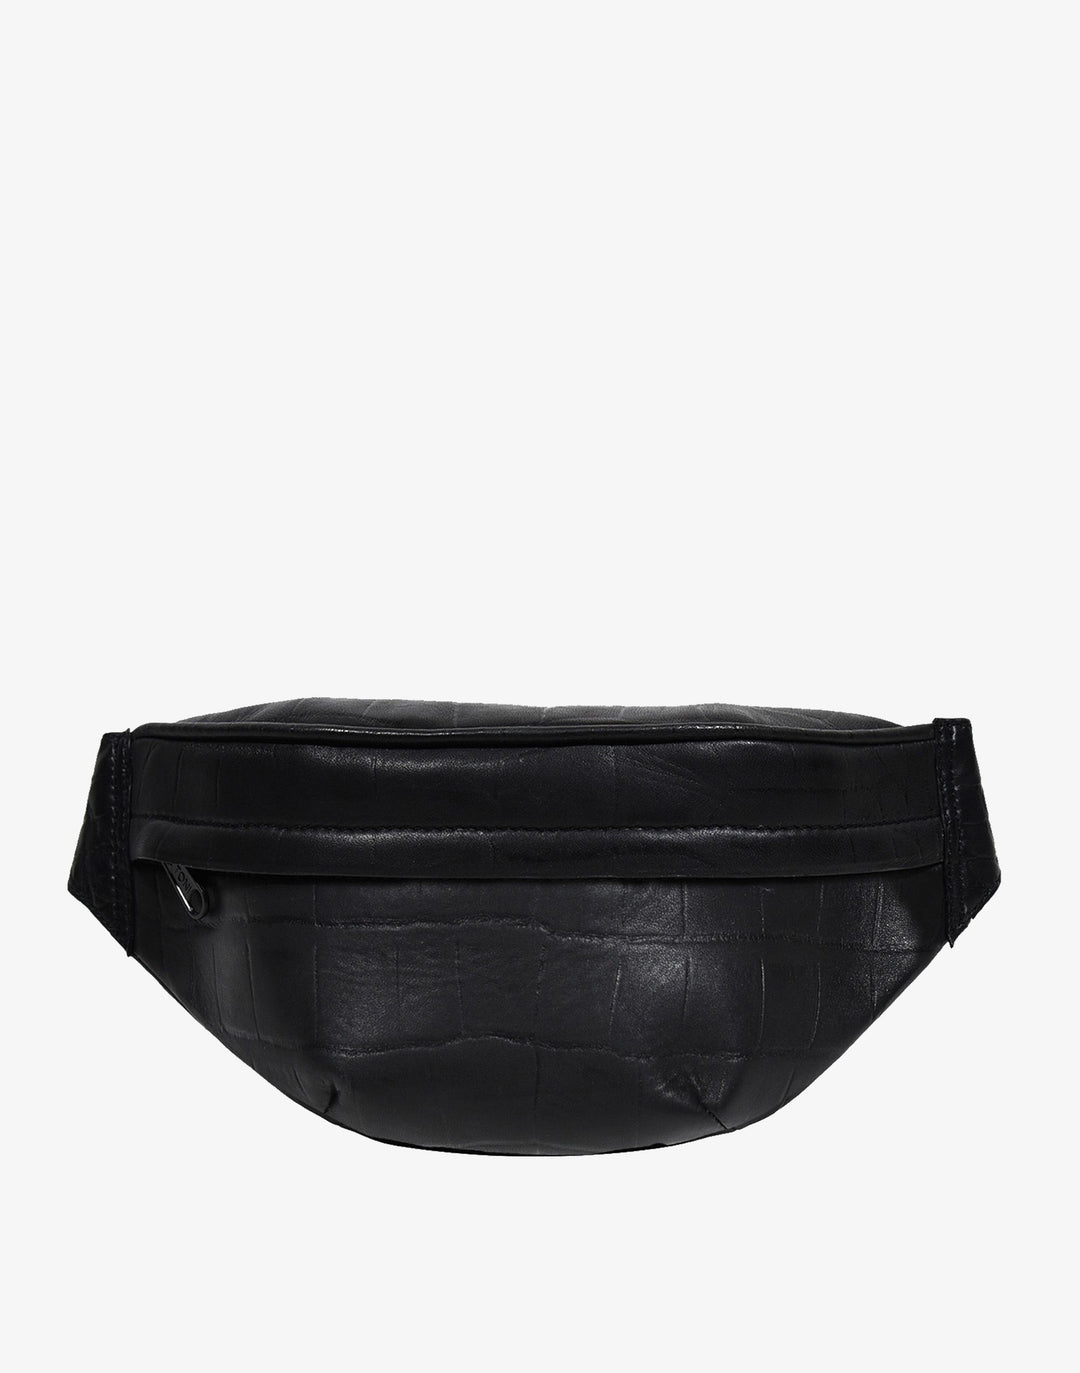 Hyer Goods Upcycled Leather Fanny Pack - Black